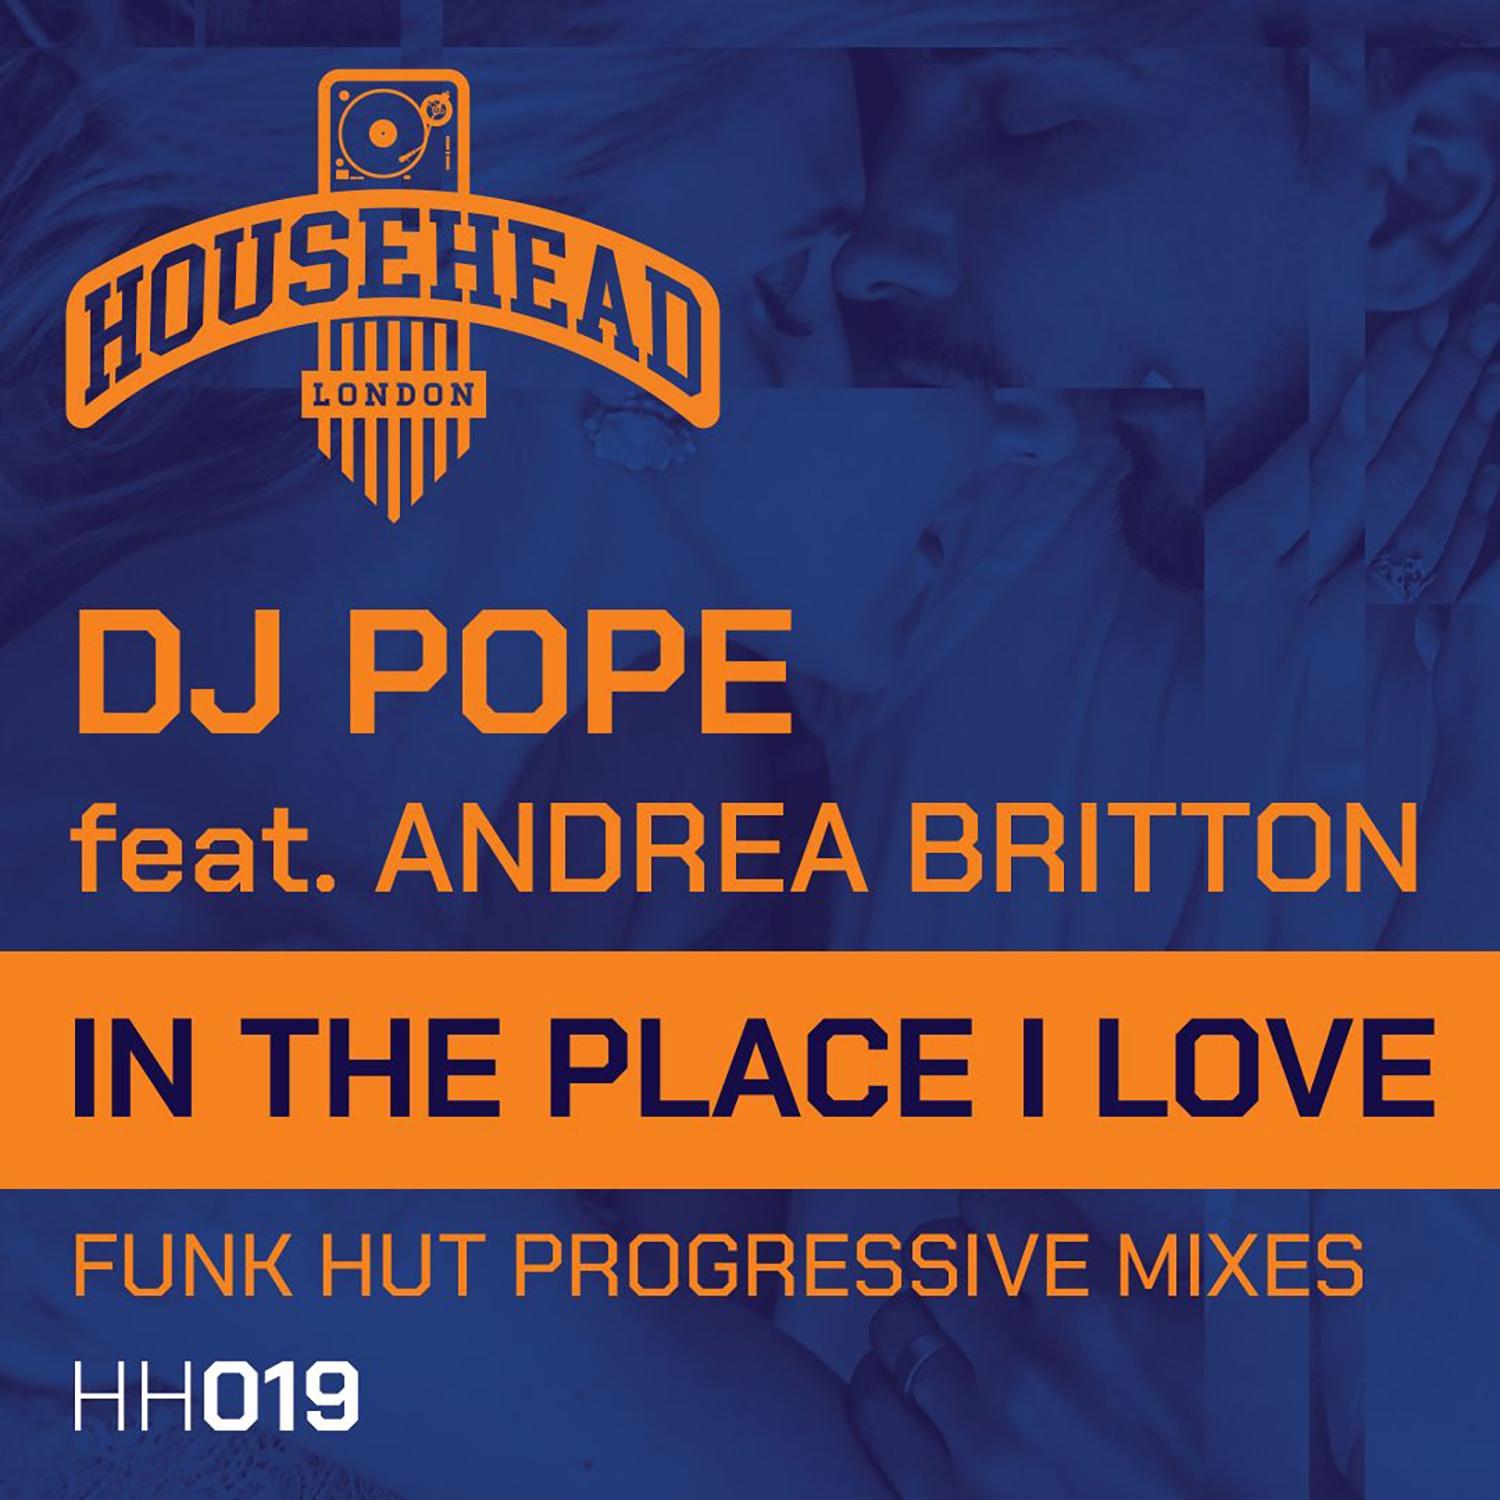 DjPope - In the Place I Love (Funkhut Reprise)